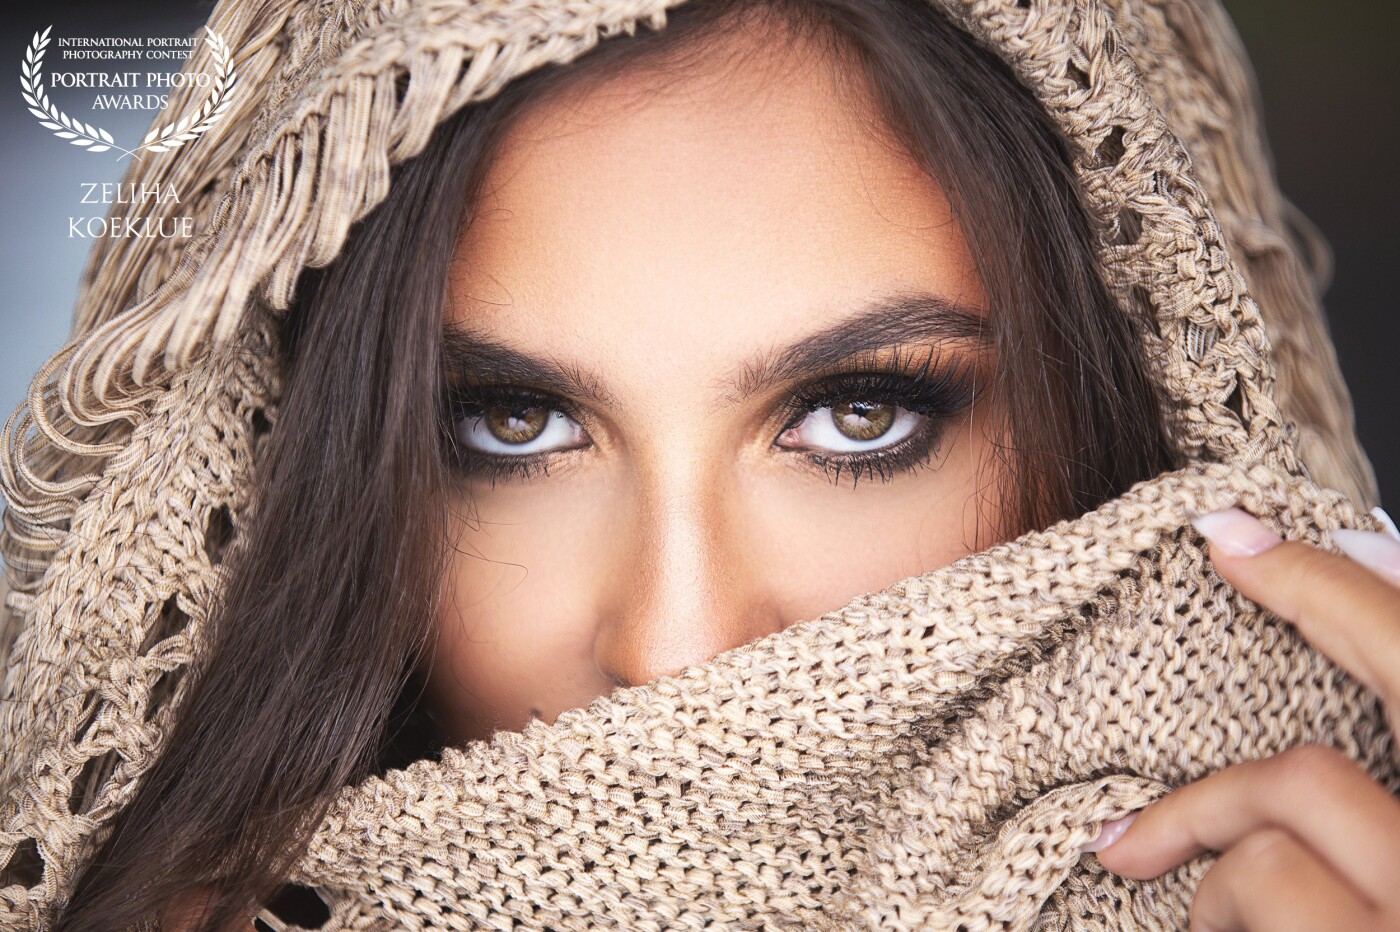 One of my favorite photos. What we used as a scarf was her cardigan. Sometimes you just have to try it. Thank you, Burcu. Makeup by Afiza Alija.